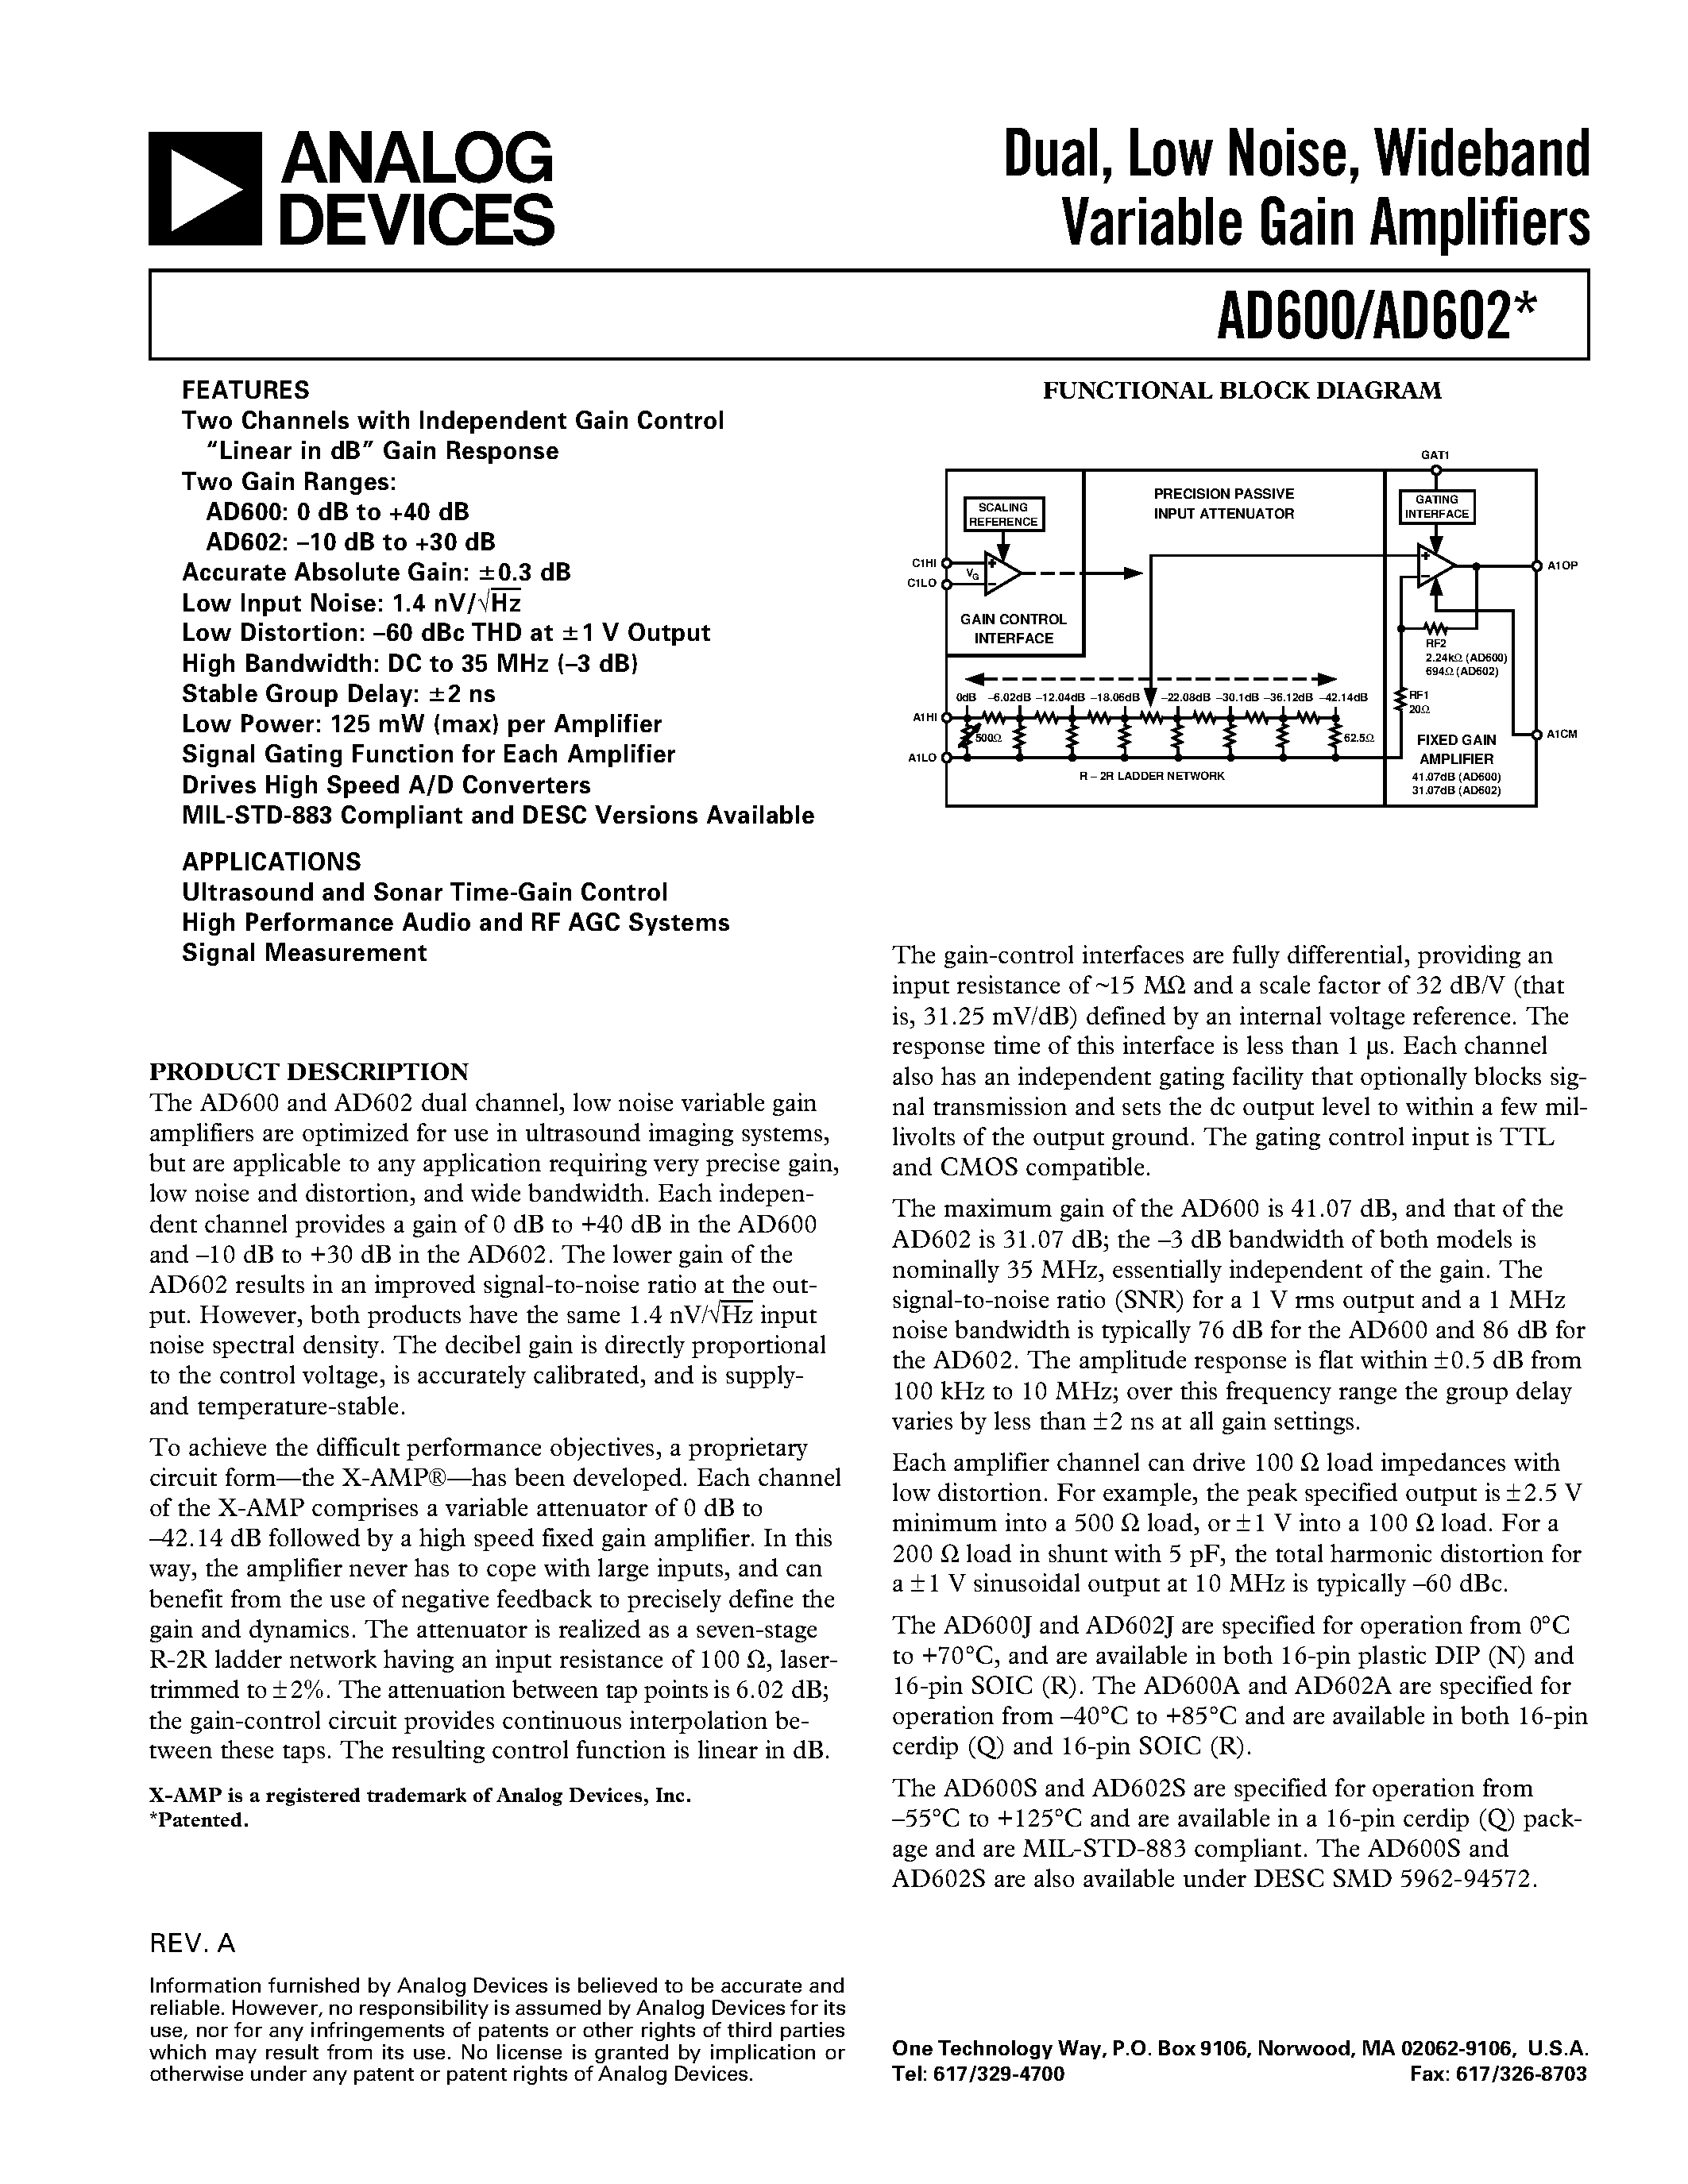 Datasheet AD600A - Dual/ Low Noise/ Wideband Variable Gain Amplifiers page 1